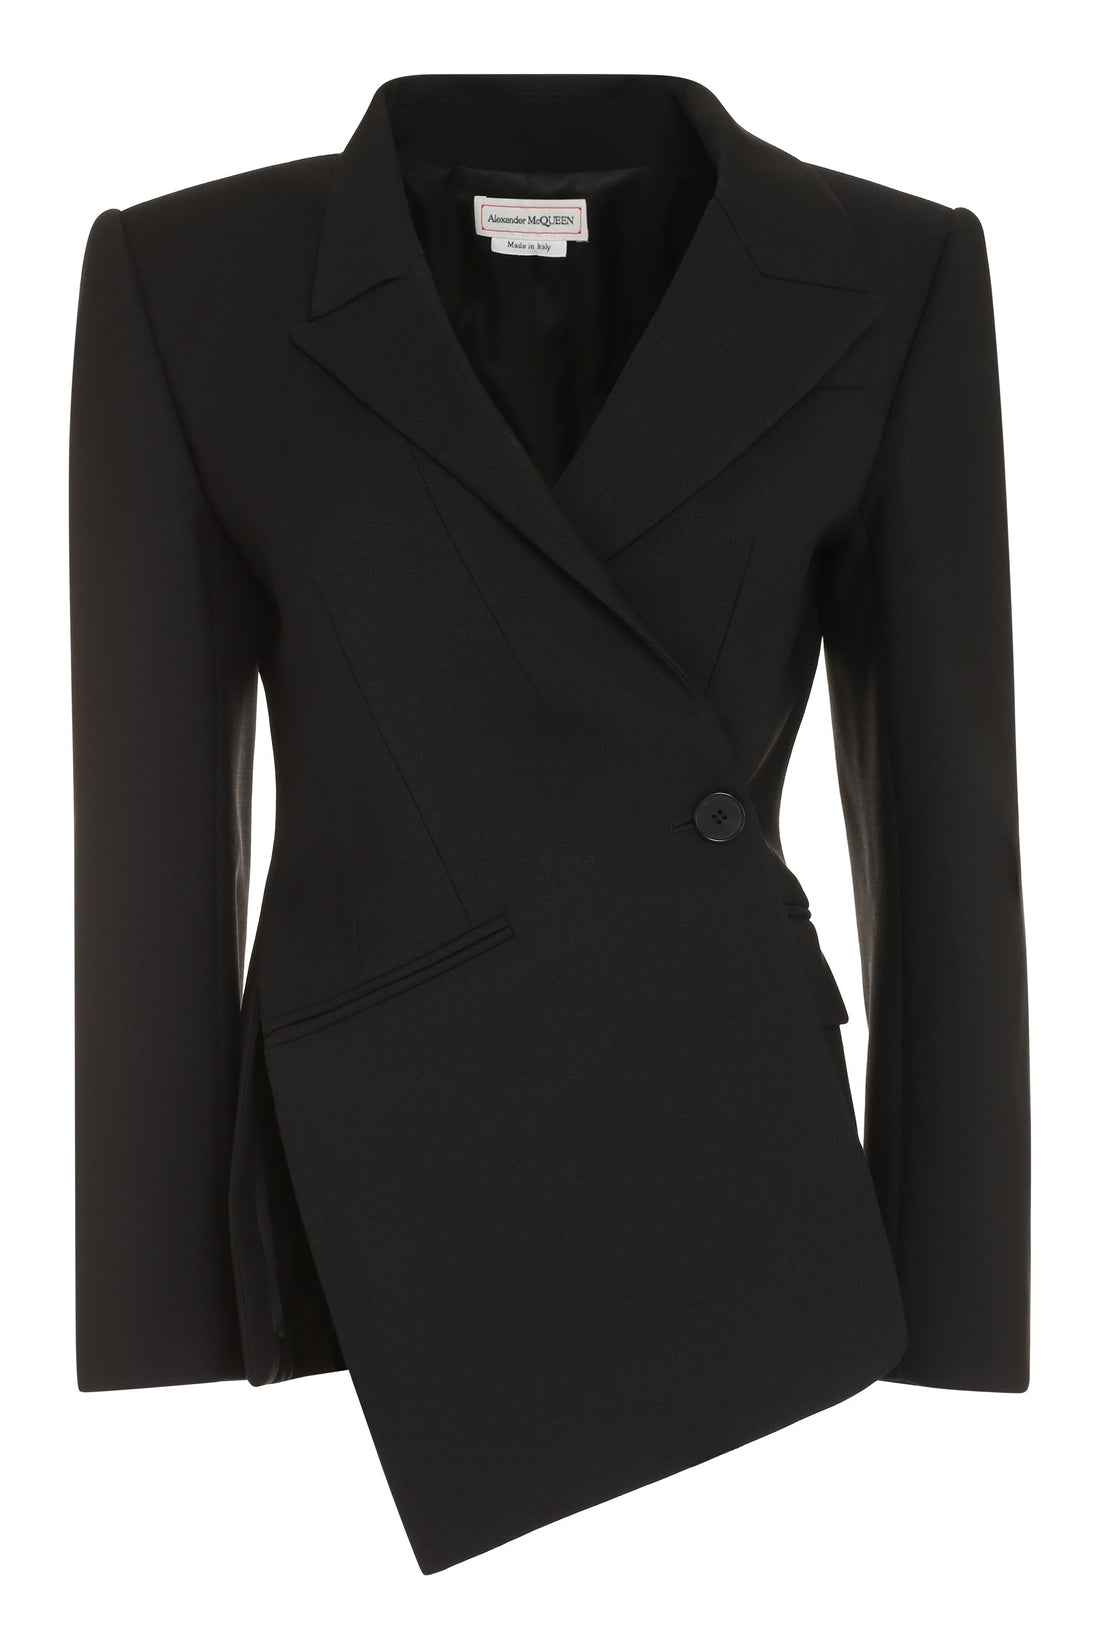 Alexander McQueen-OUTLET-SALE-Double-breasted wool blazer-ARCHIVIST